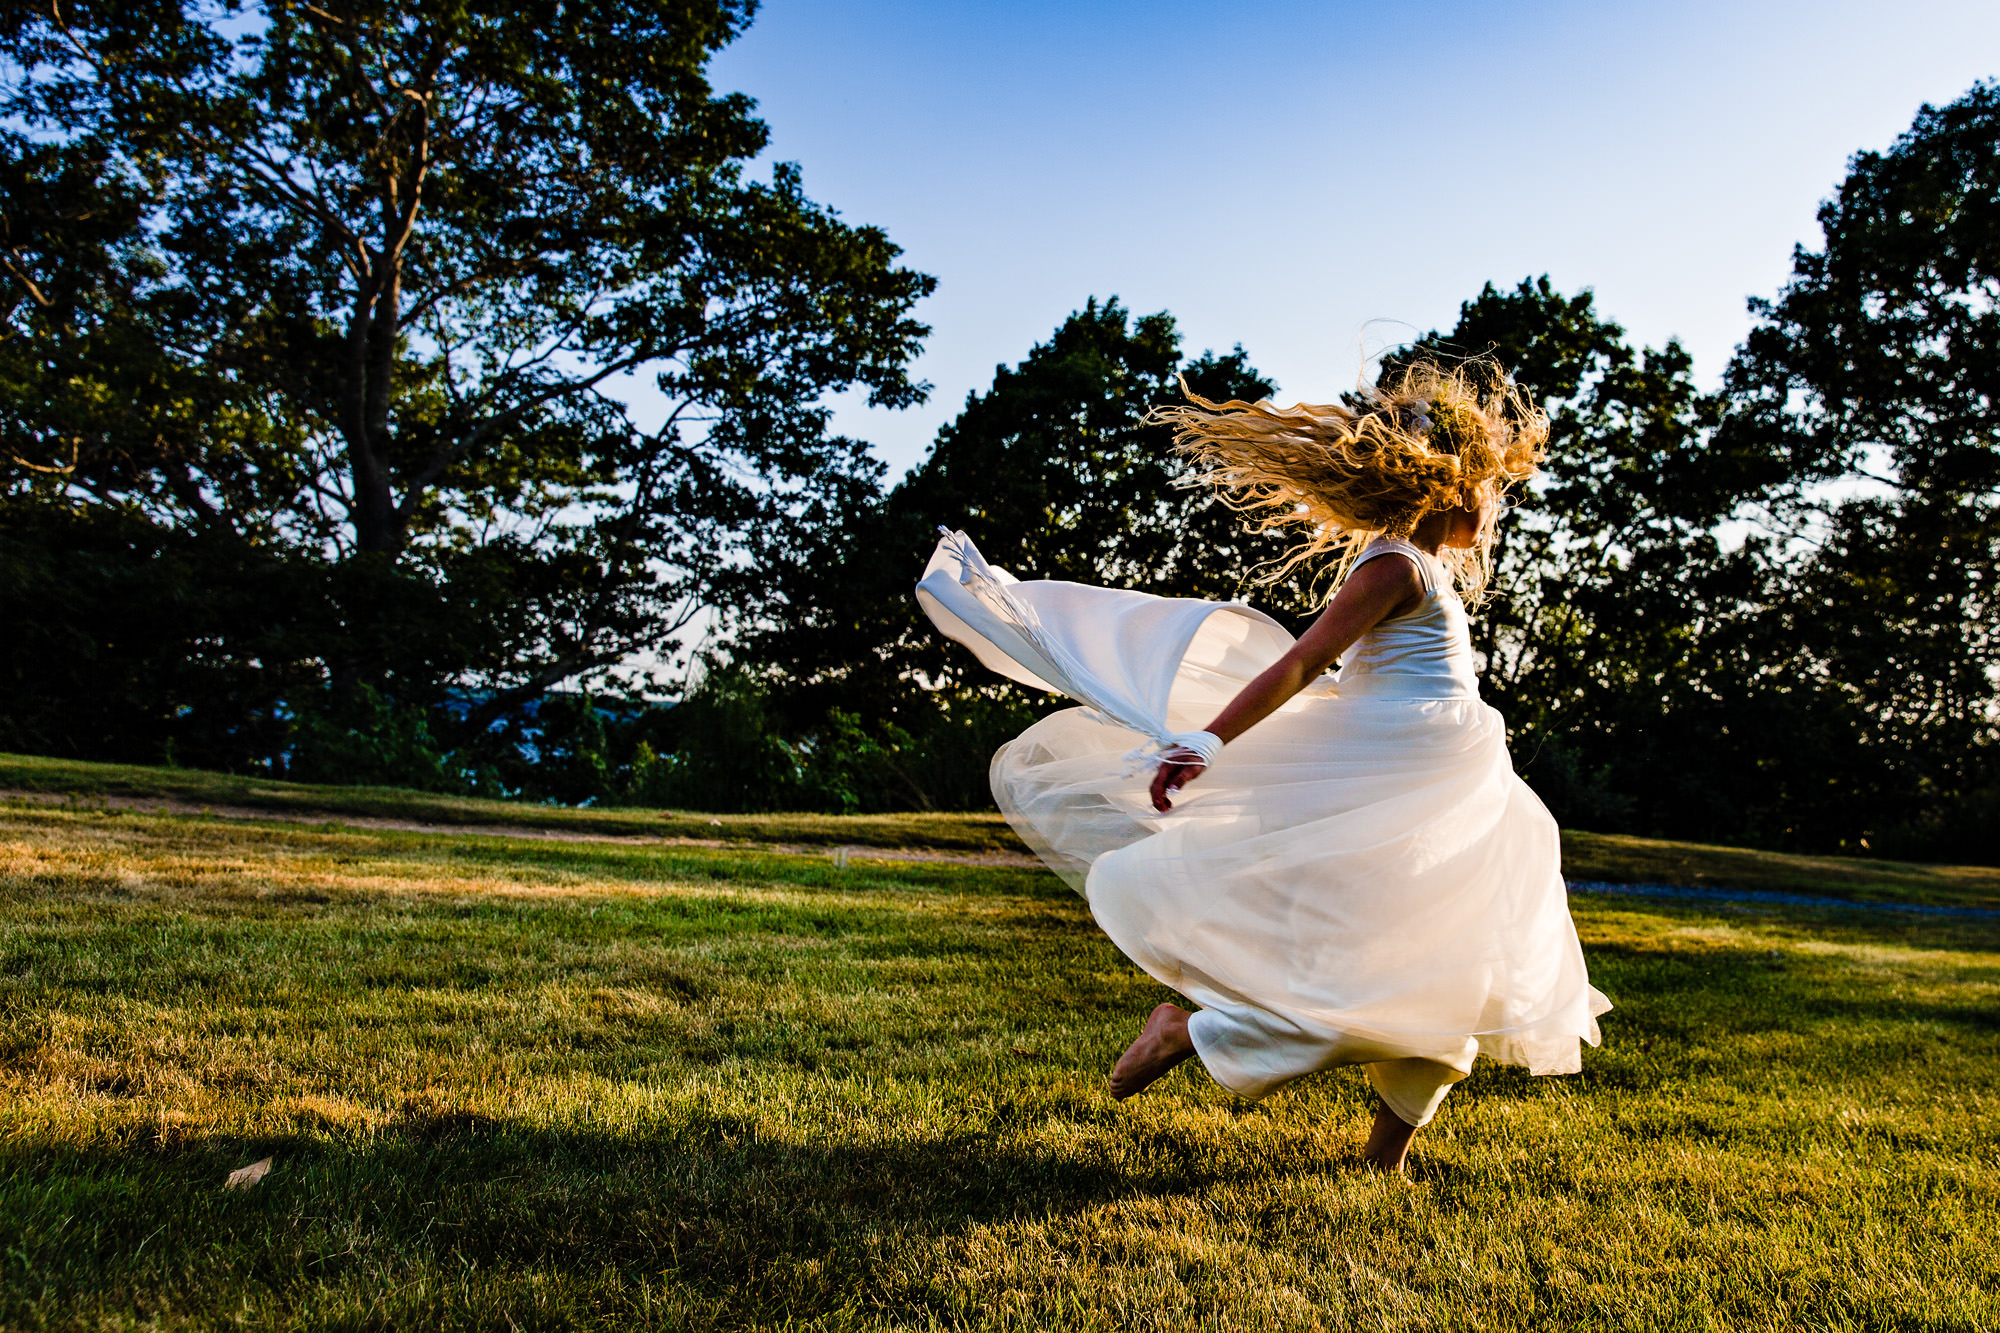 A flower girl frolics during golden hour at a wedding in Maine